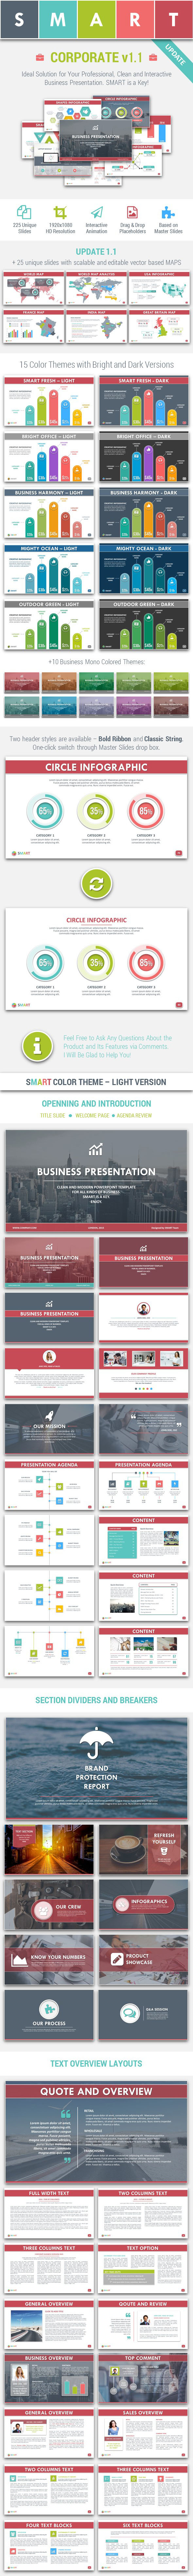 CORPORATE - Business Focused PowerPoint Template